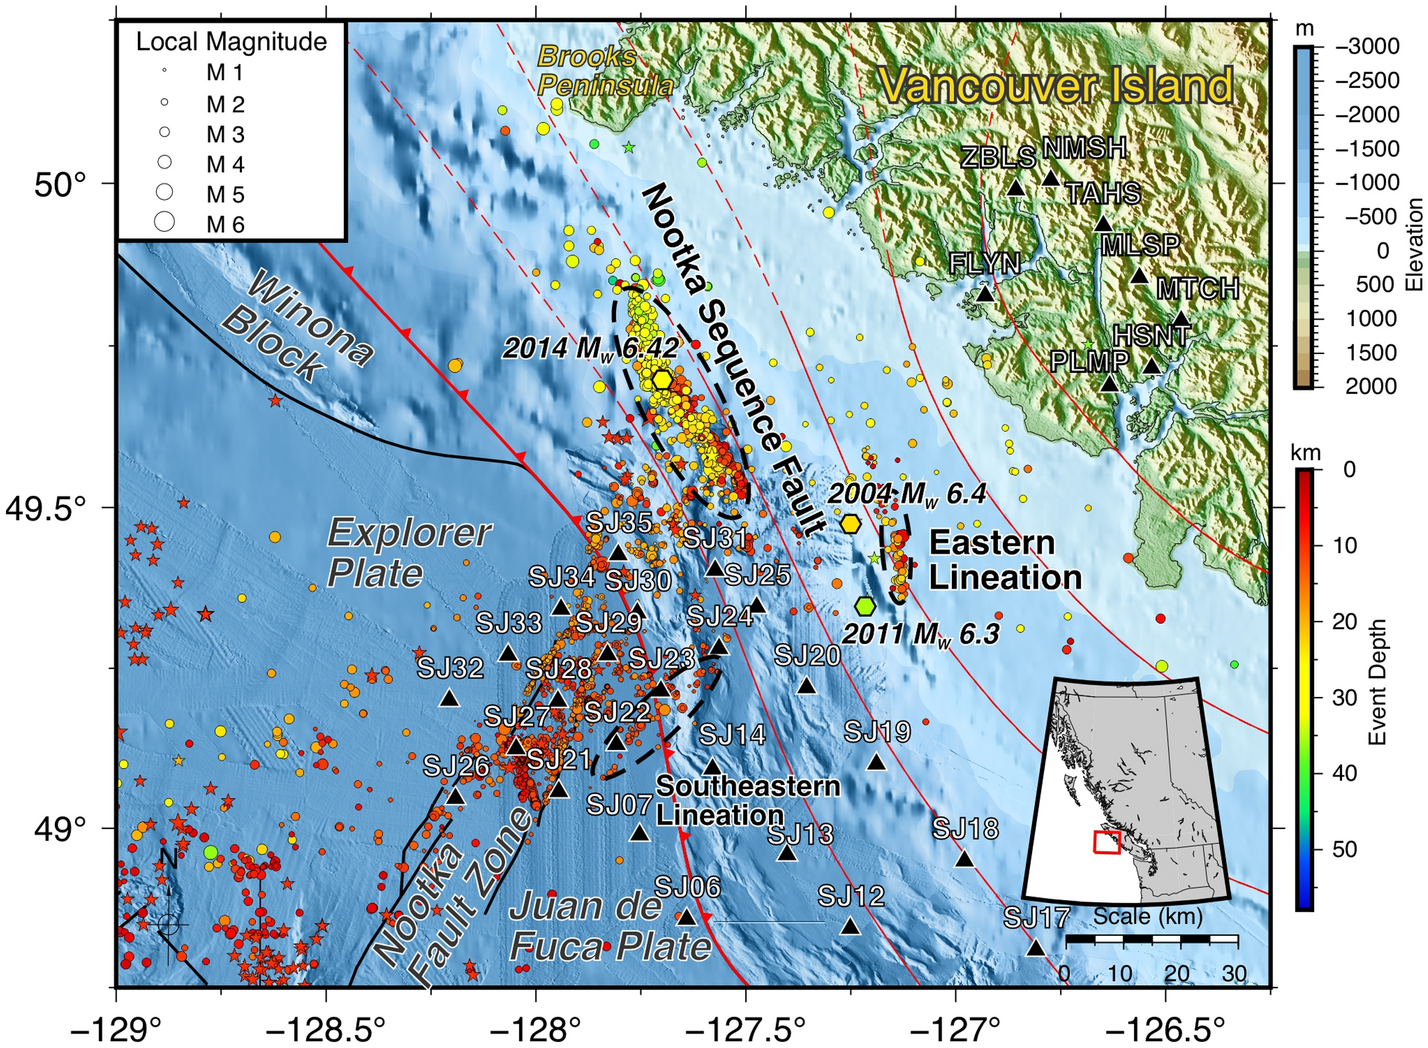 Tectonic evolution of the Nootka fault zone and deformation of the shallow  subducted Explorer plate in northern Cascadia as revealed by earthquake  distributions and seismic tomography